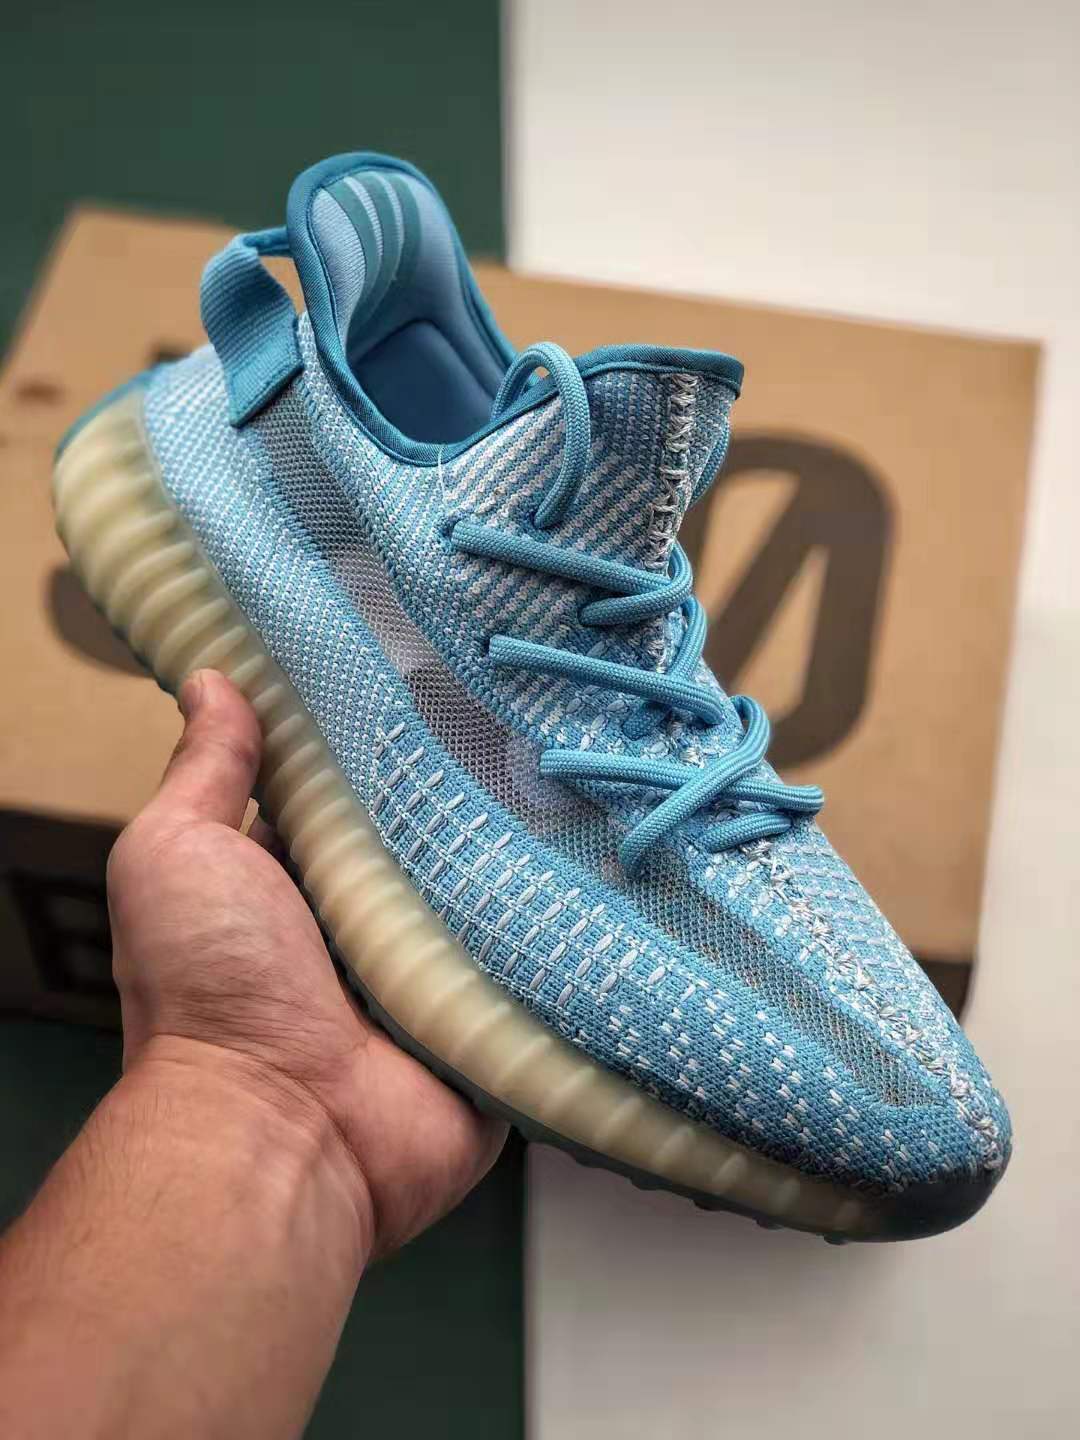 Adidas Yeezy Boost 350 V2 Ice Blue CI1173 - Limited Edition Sneakers